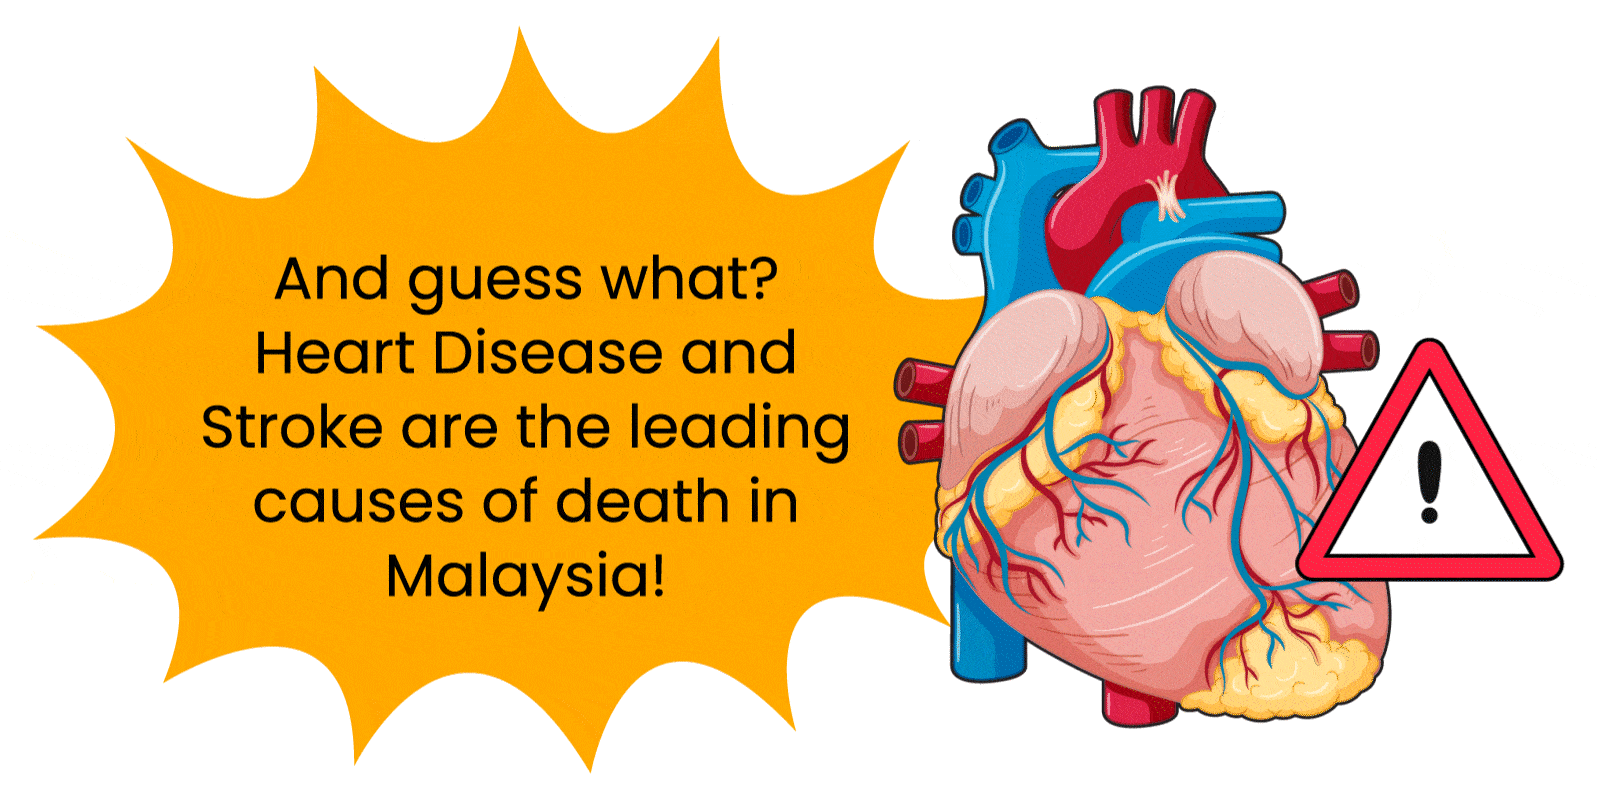 Heart disease and stroke are the leading causes of death in Malaysia